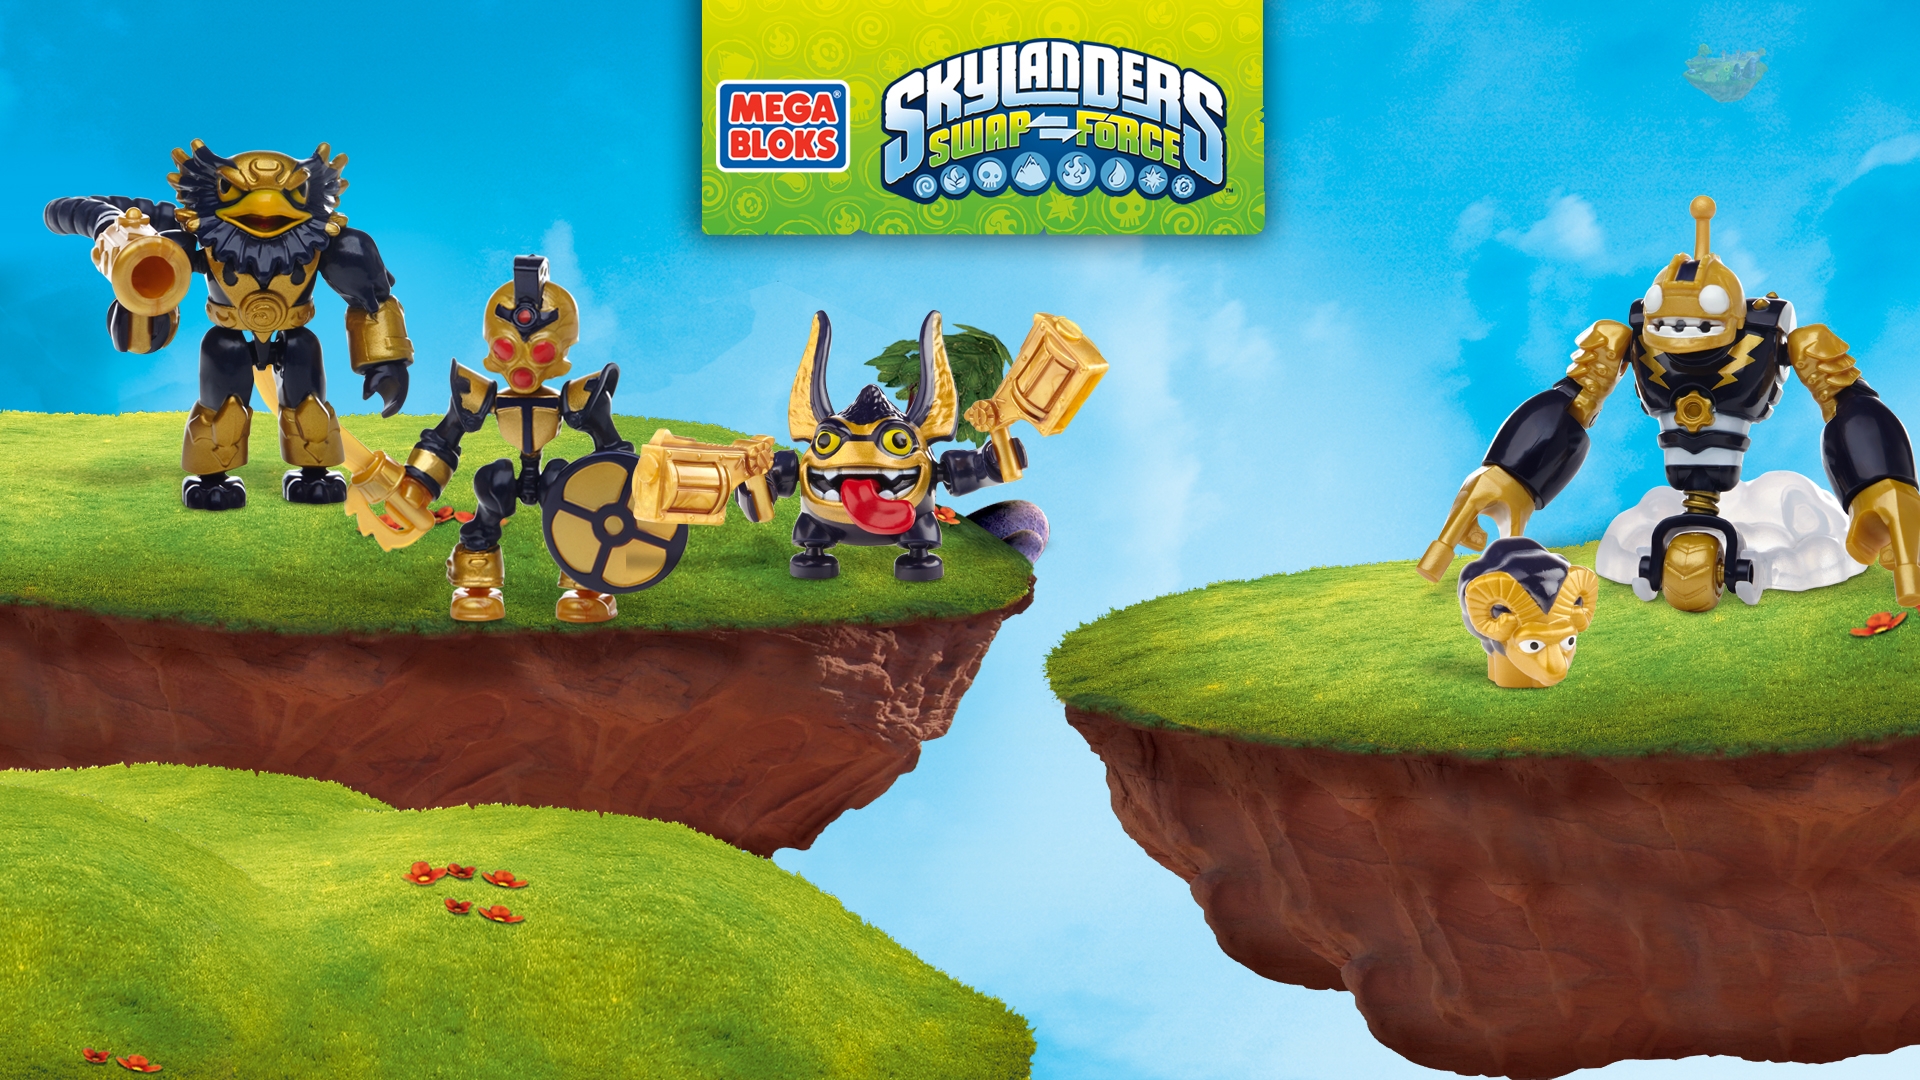 Its as simple as a few clicks and dropping the Skylanders in 1920x1080